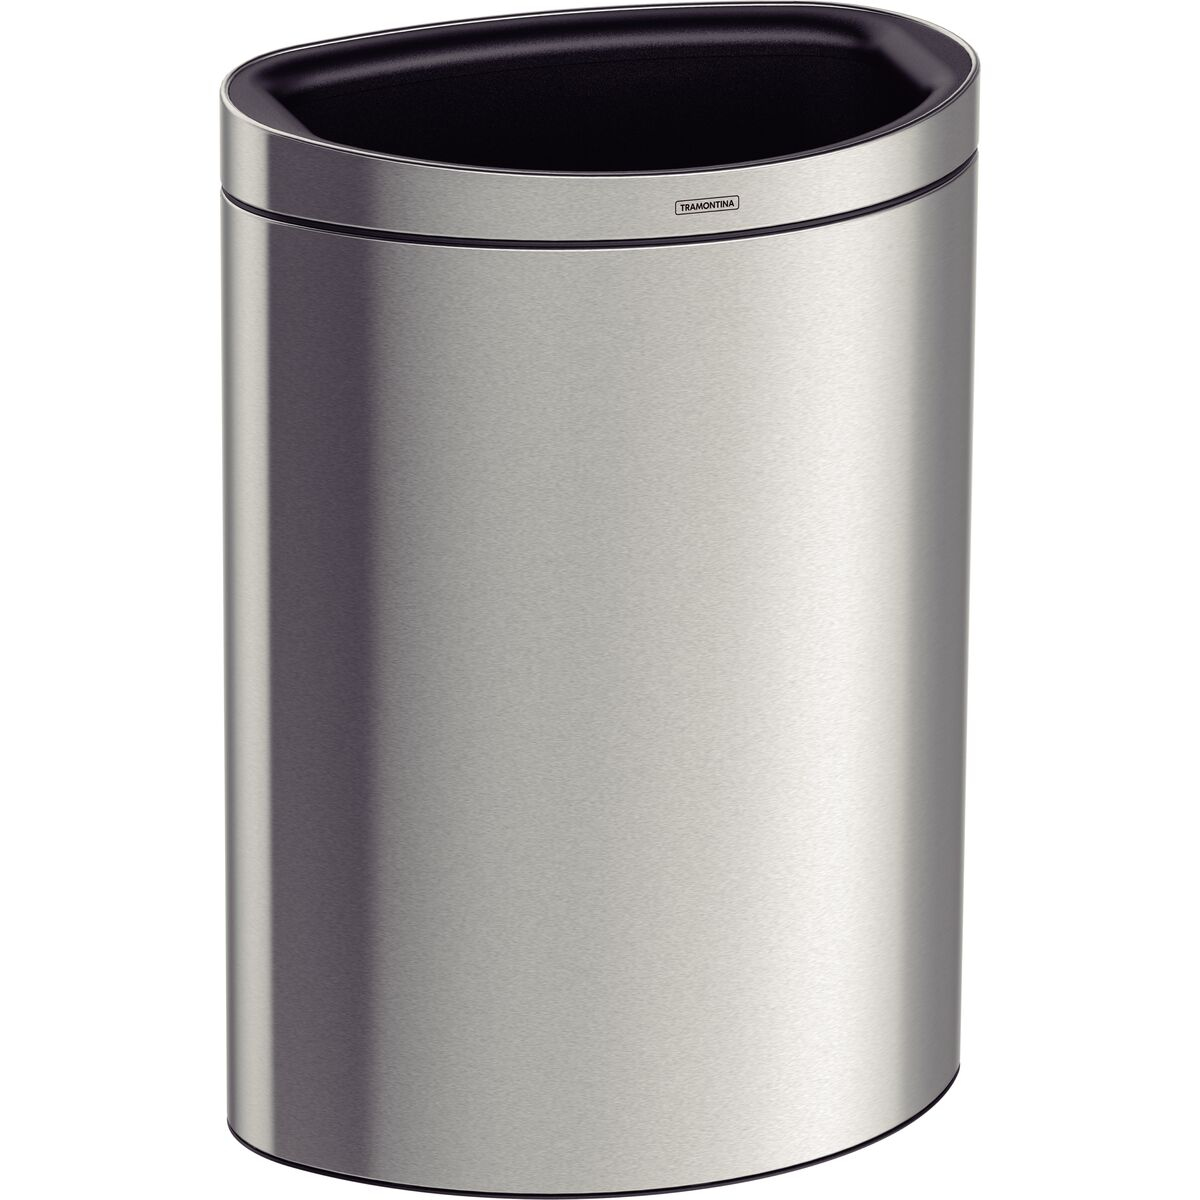 Tramontina 49L stainless steel trash bin Tipo D with a scotch brite finish and removable internal bucket